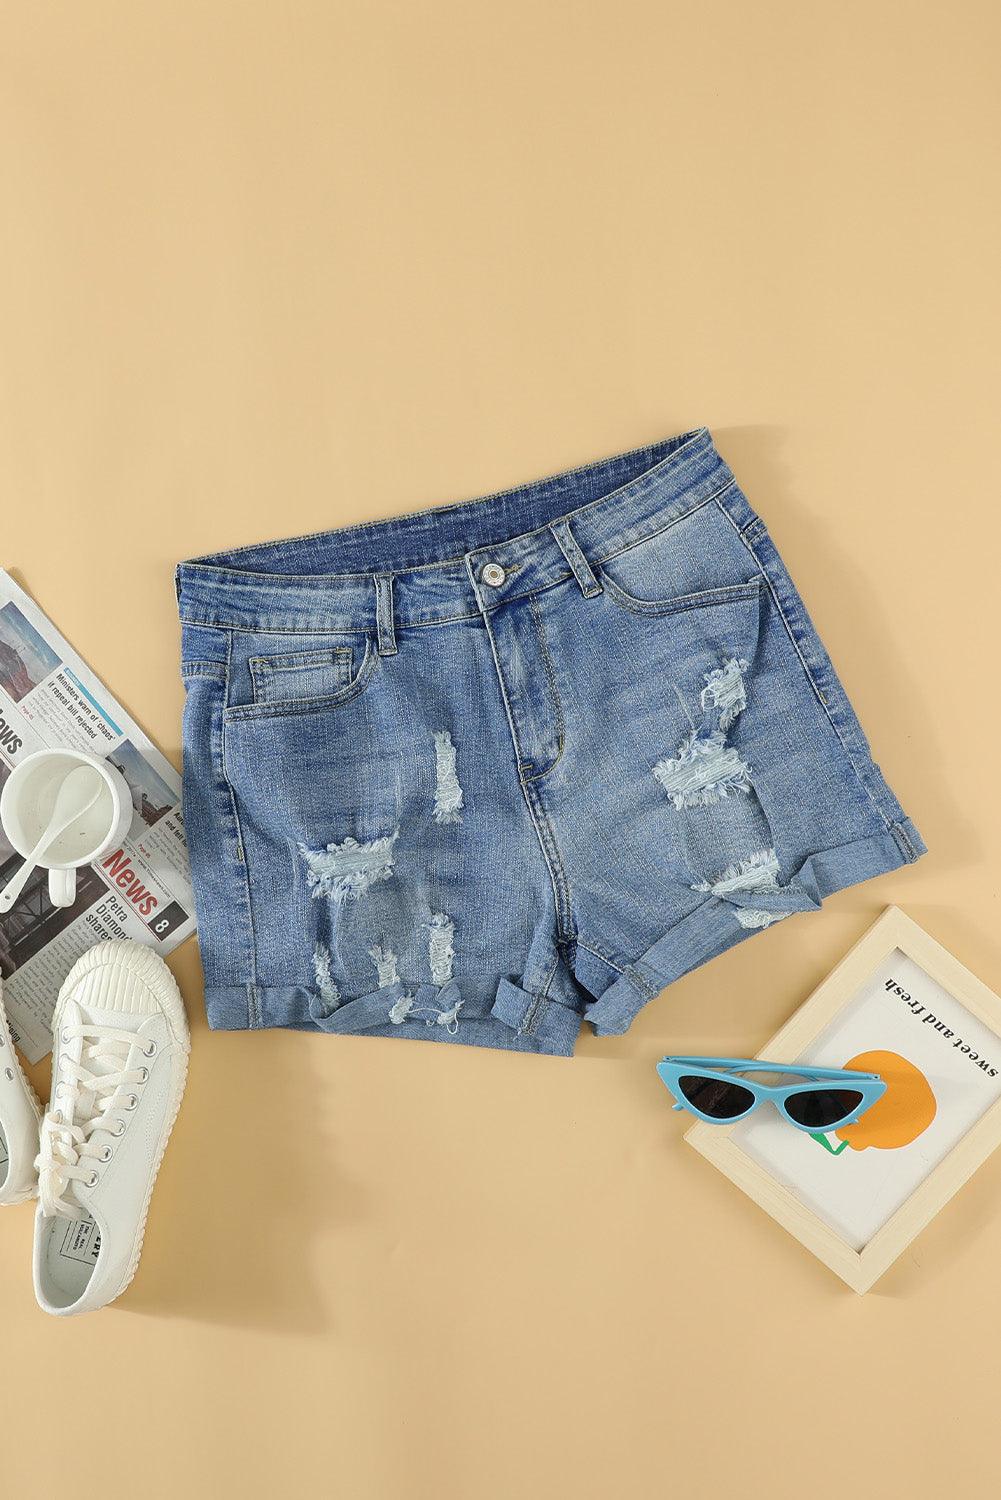 Blue Vintage Faded and Distressed Denim Shorts